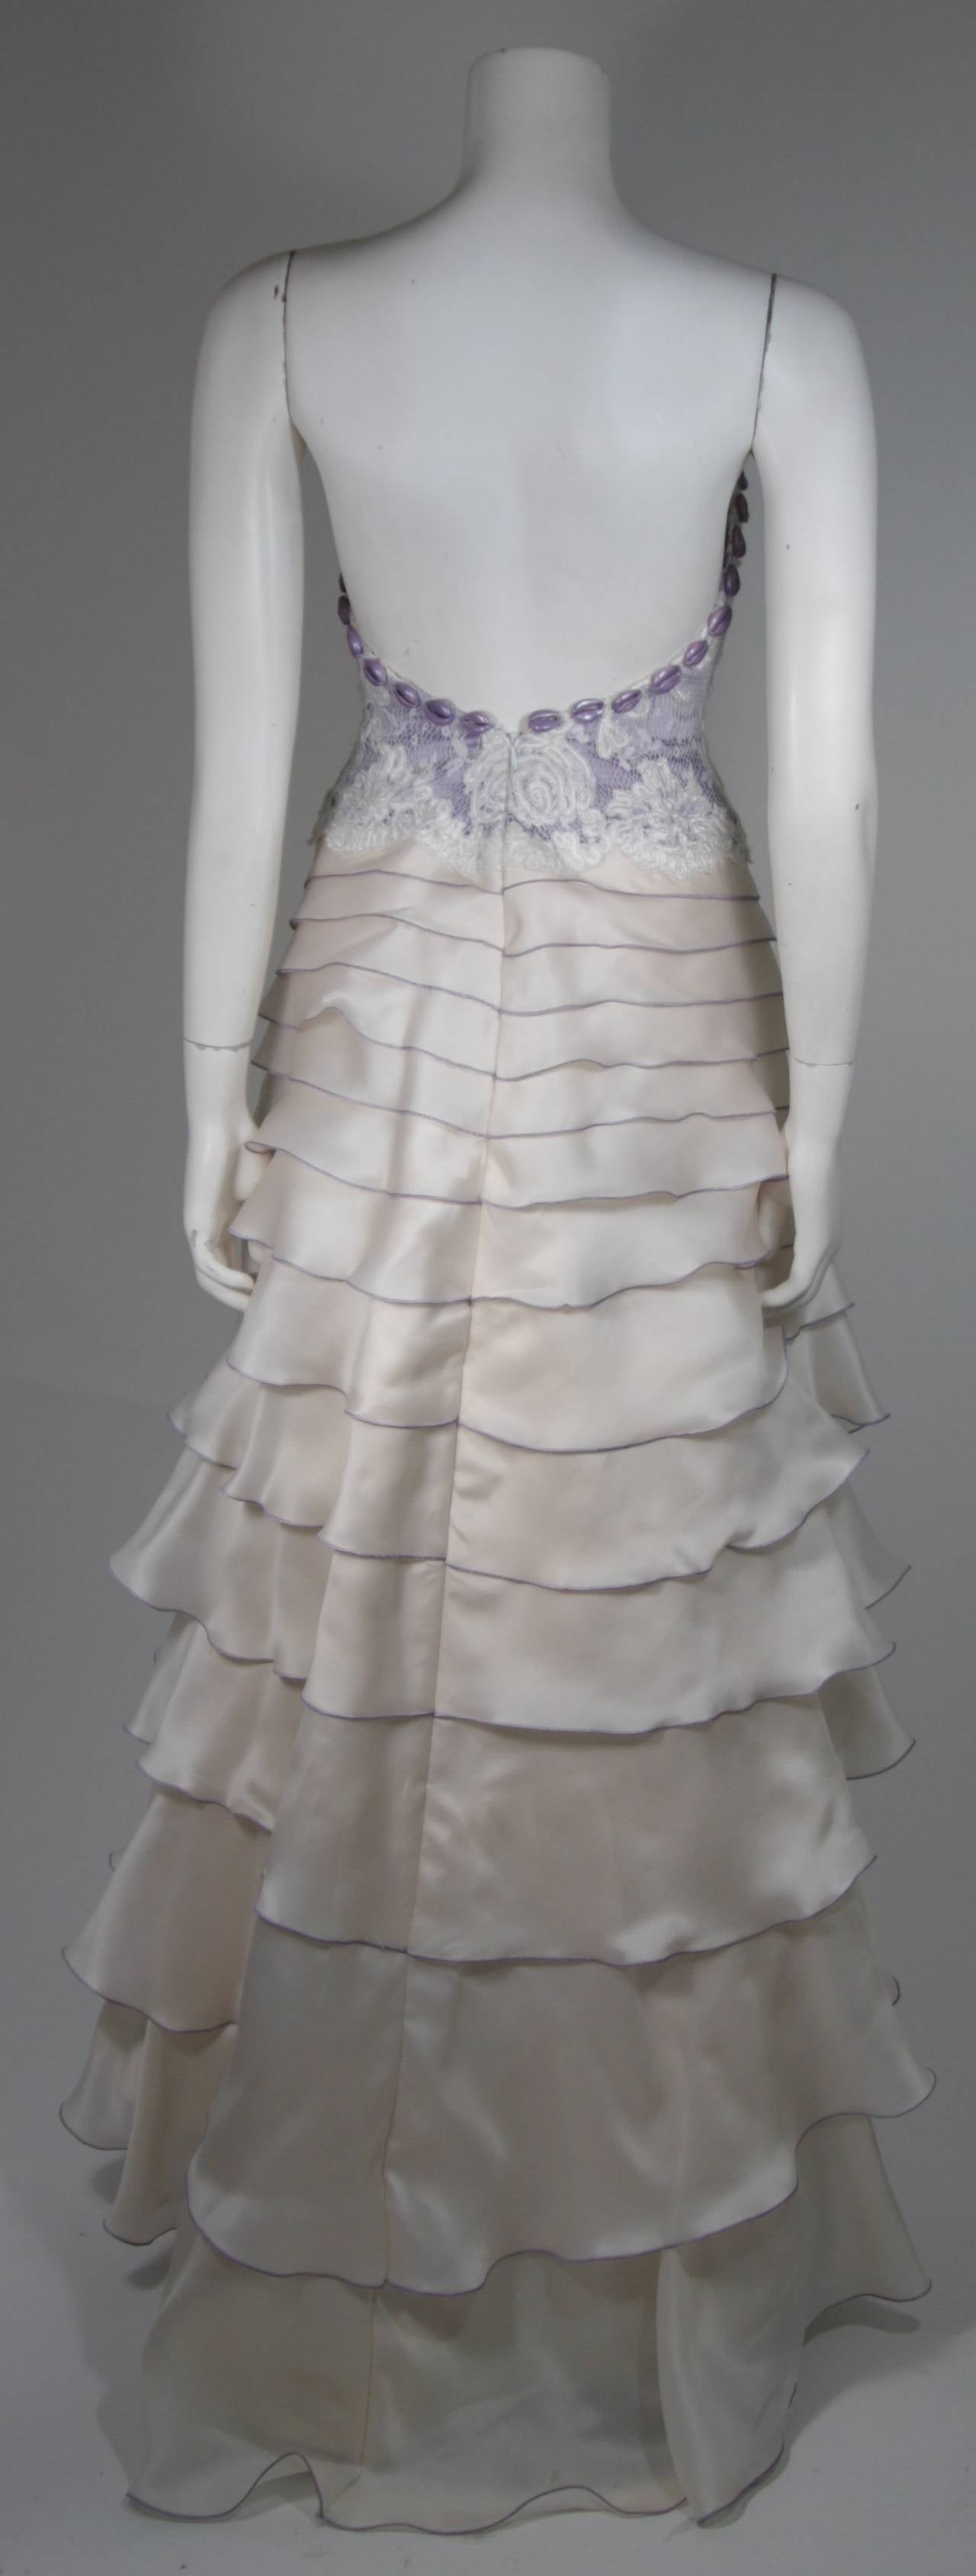 Rutina Wesley's Lavender & Cream Paul Campbell Couture Wedding Gown circa 2005 For Sale 1